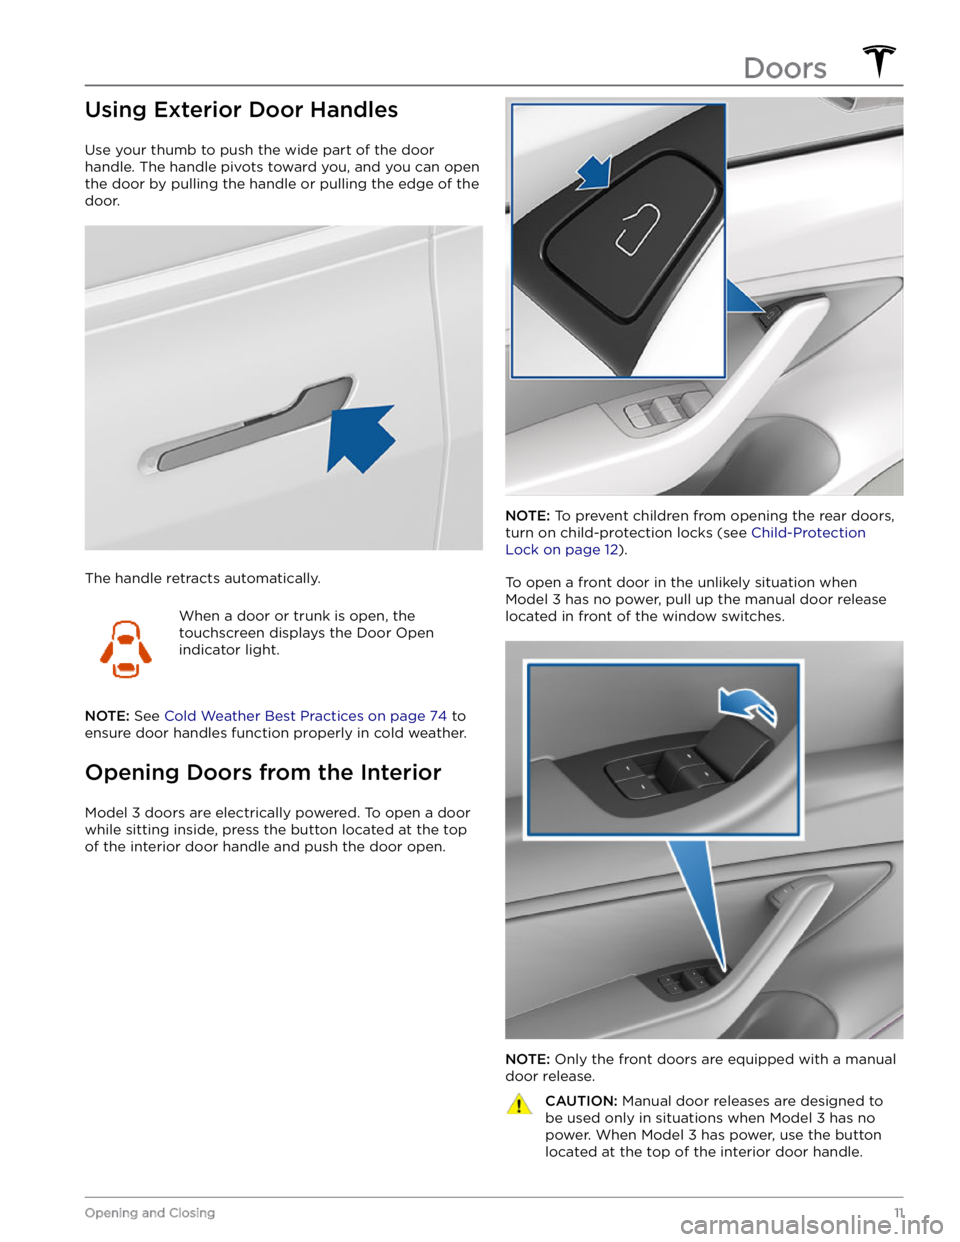 TESLA MODEL 3 2022  Owner´s Manual Using Exterior Door Handles
Use your thumb to push the wide part of the door 
handle. The handle pivots toward you, and you can open 
the door by pulling the handle or pulling the edge of the  door.
T